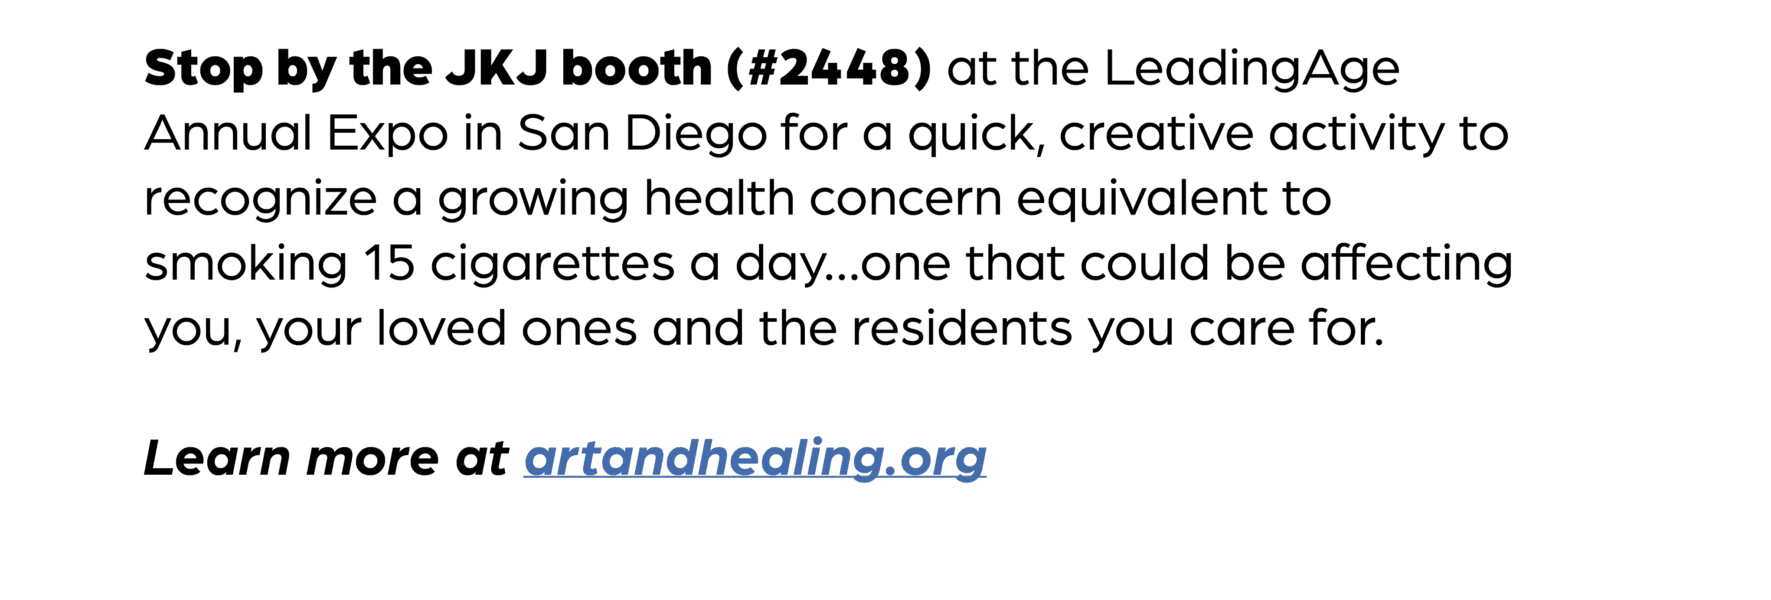 Stop by the JKJ booth (#2448) at the LeadingAge Annual Expo in San Diego for a quick, creative activity to recognize a growing health concern equivalent to smoking 15 cigarettes a day…one that could be affecting you, your loved ones and the residents you care for. Learn more at artandhealing.org